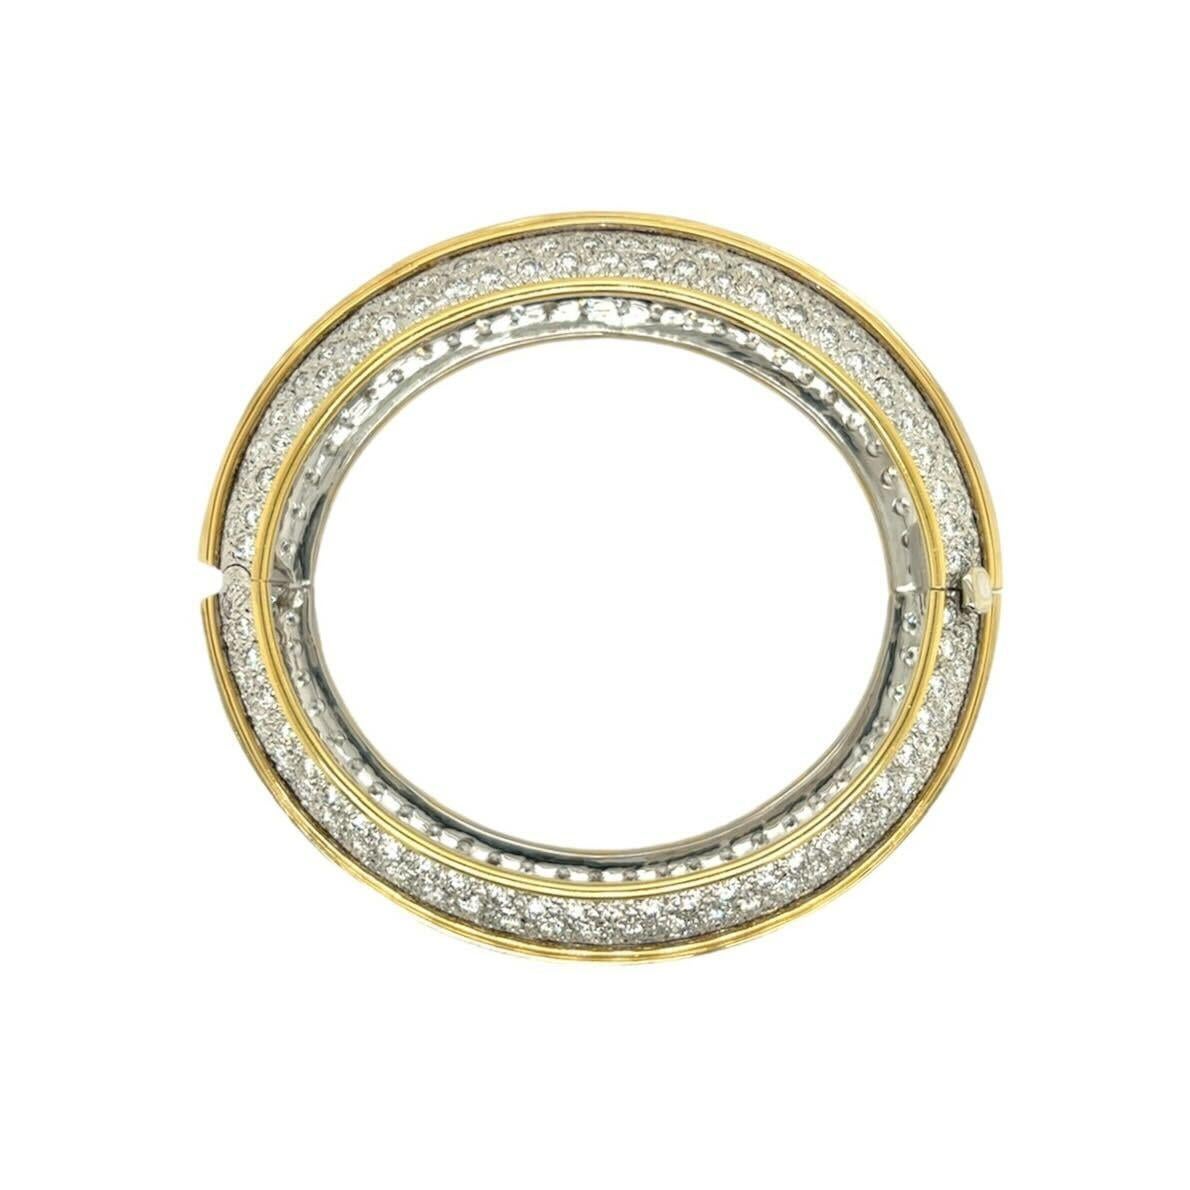 An 18 karat yellow and white gold and diamond bracelet, Esther Gallant.  Designed as a hinged bombe bangle decorated around the center with approximately fifty eight  channel set baguette cut diamonds within a yellow gold molding, the outer sides